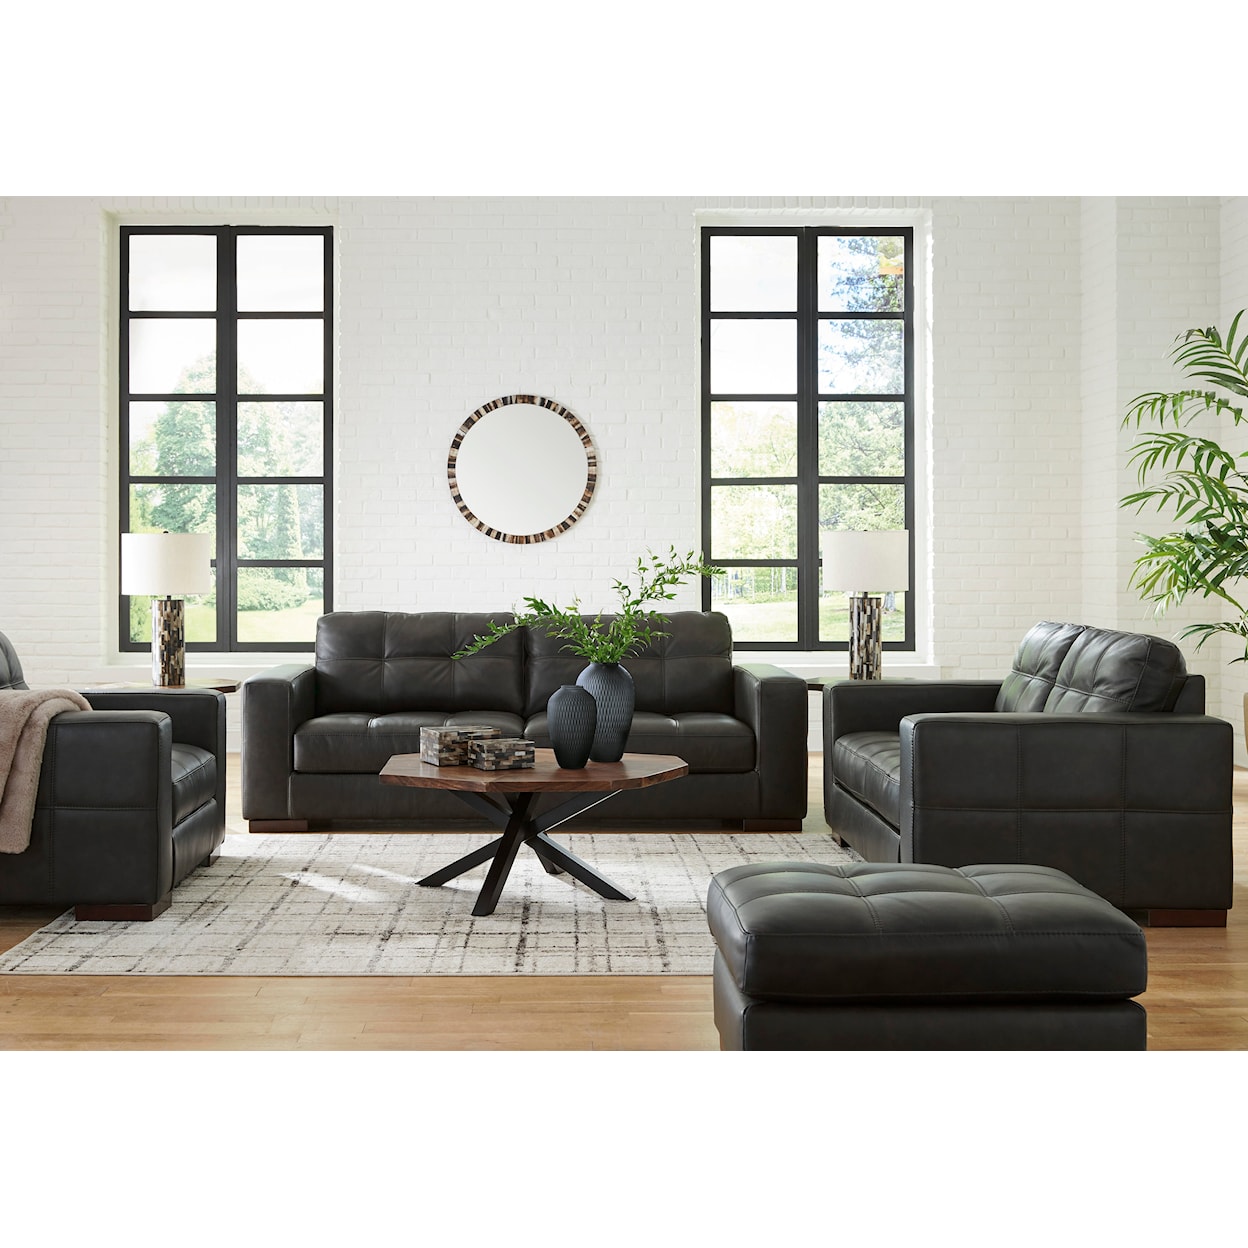 Signature Design by Ashley Luigi Oversized Chair and Ottoman